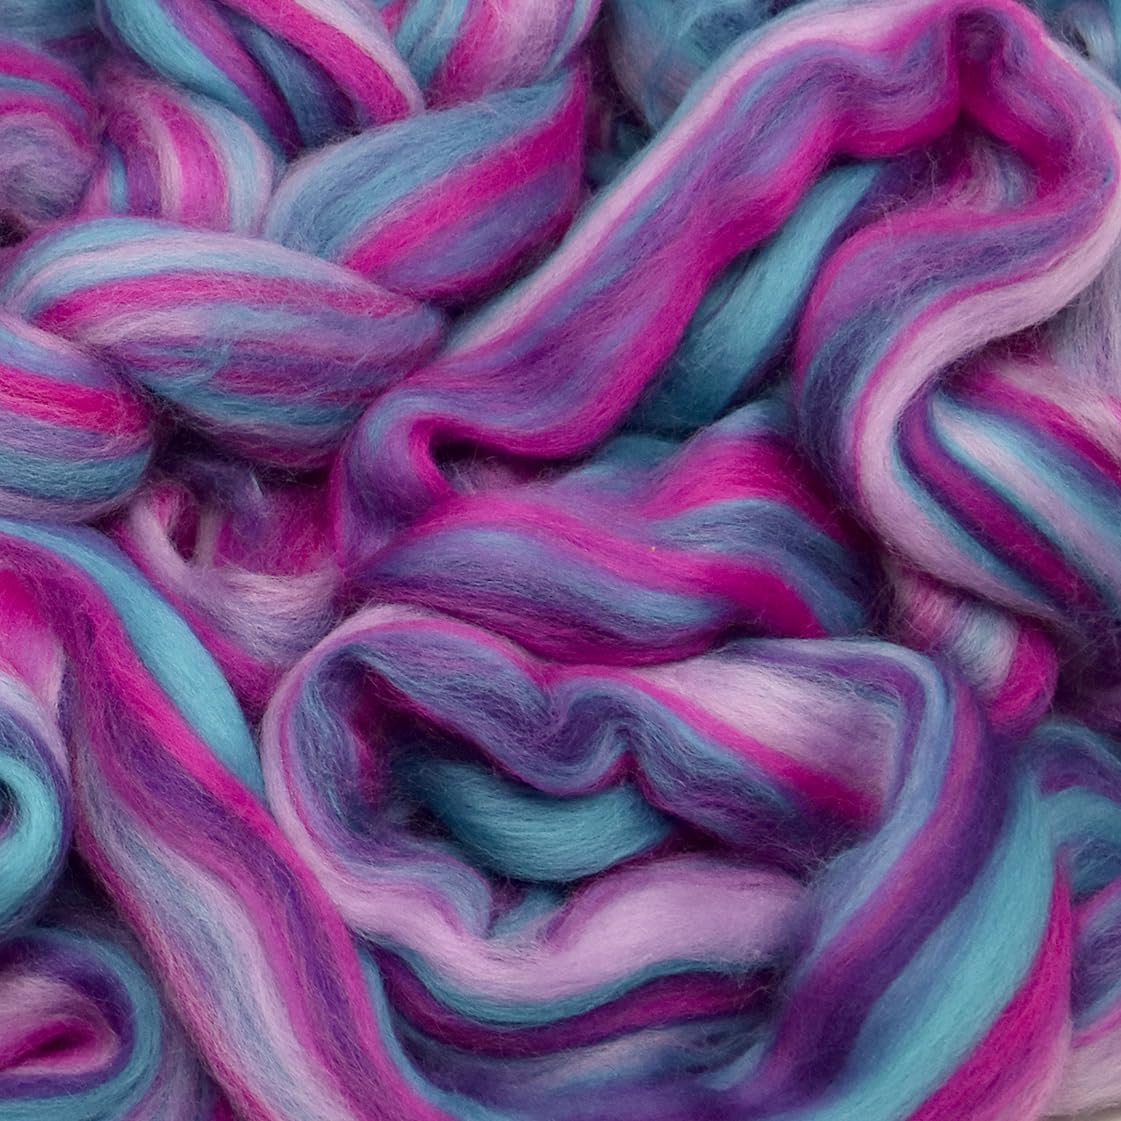 Fiesta Colorful Merino Wool Combed Top Roving for Spinning and Felting. Limited Edition. Alicorn Dream